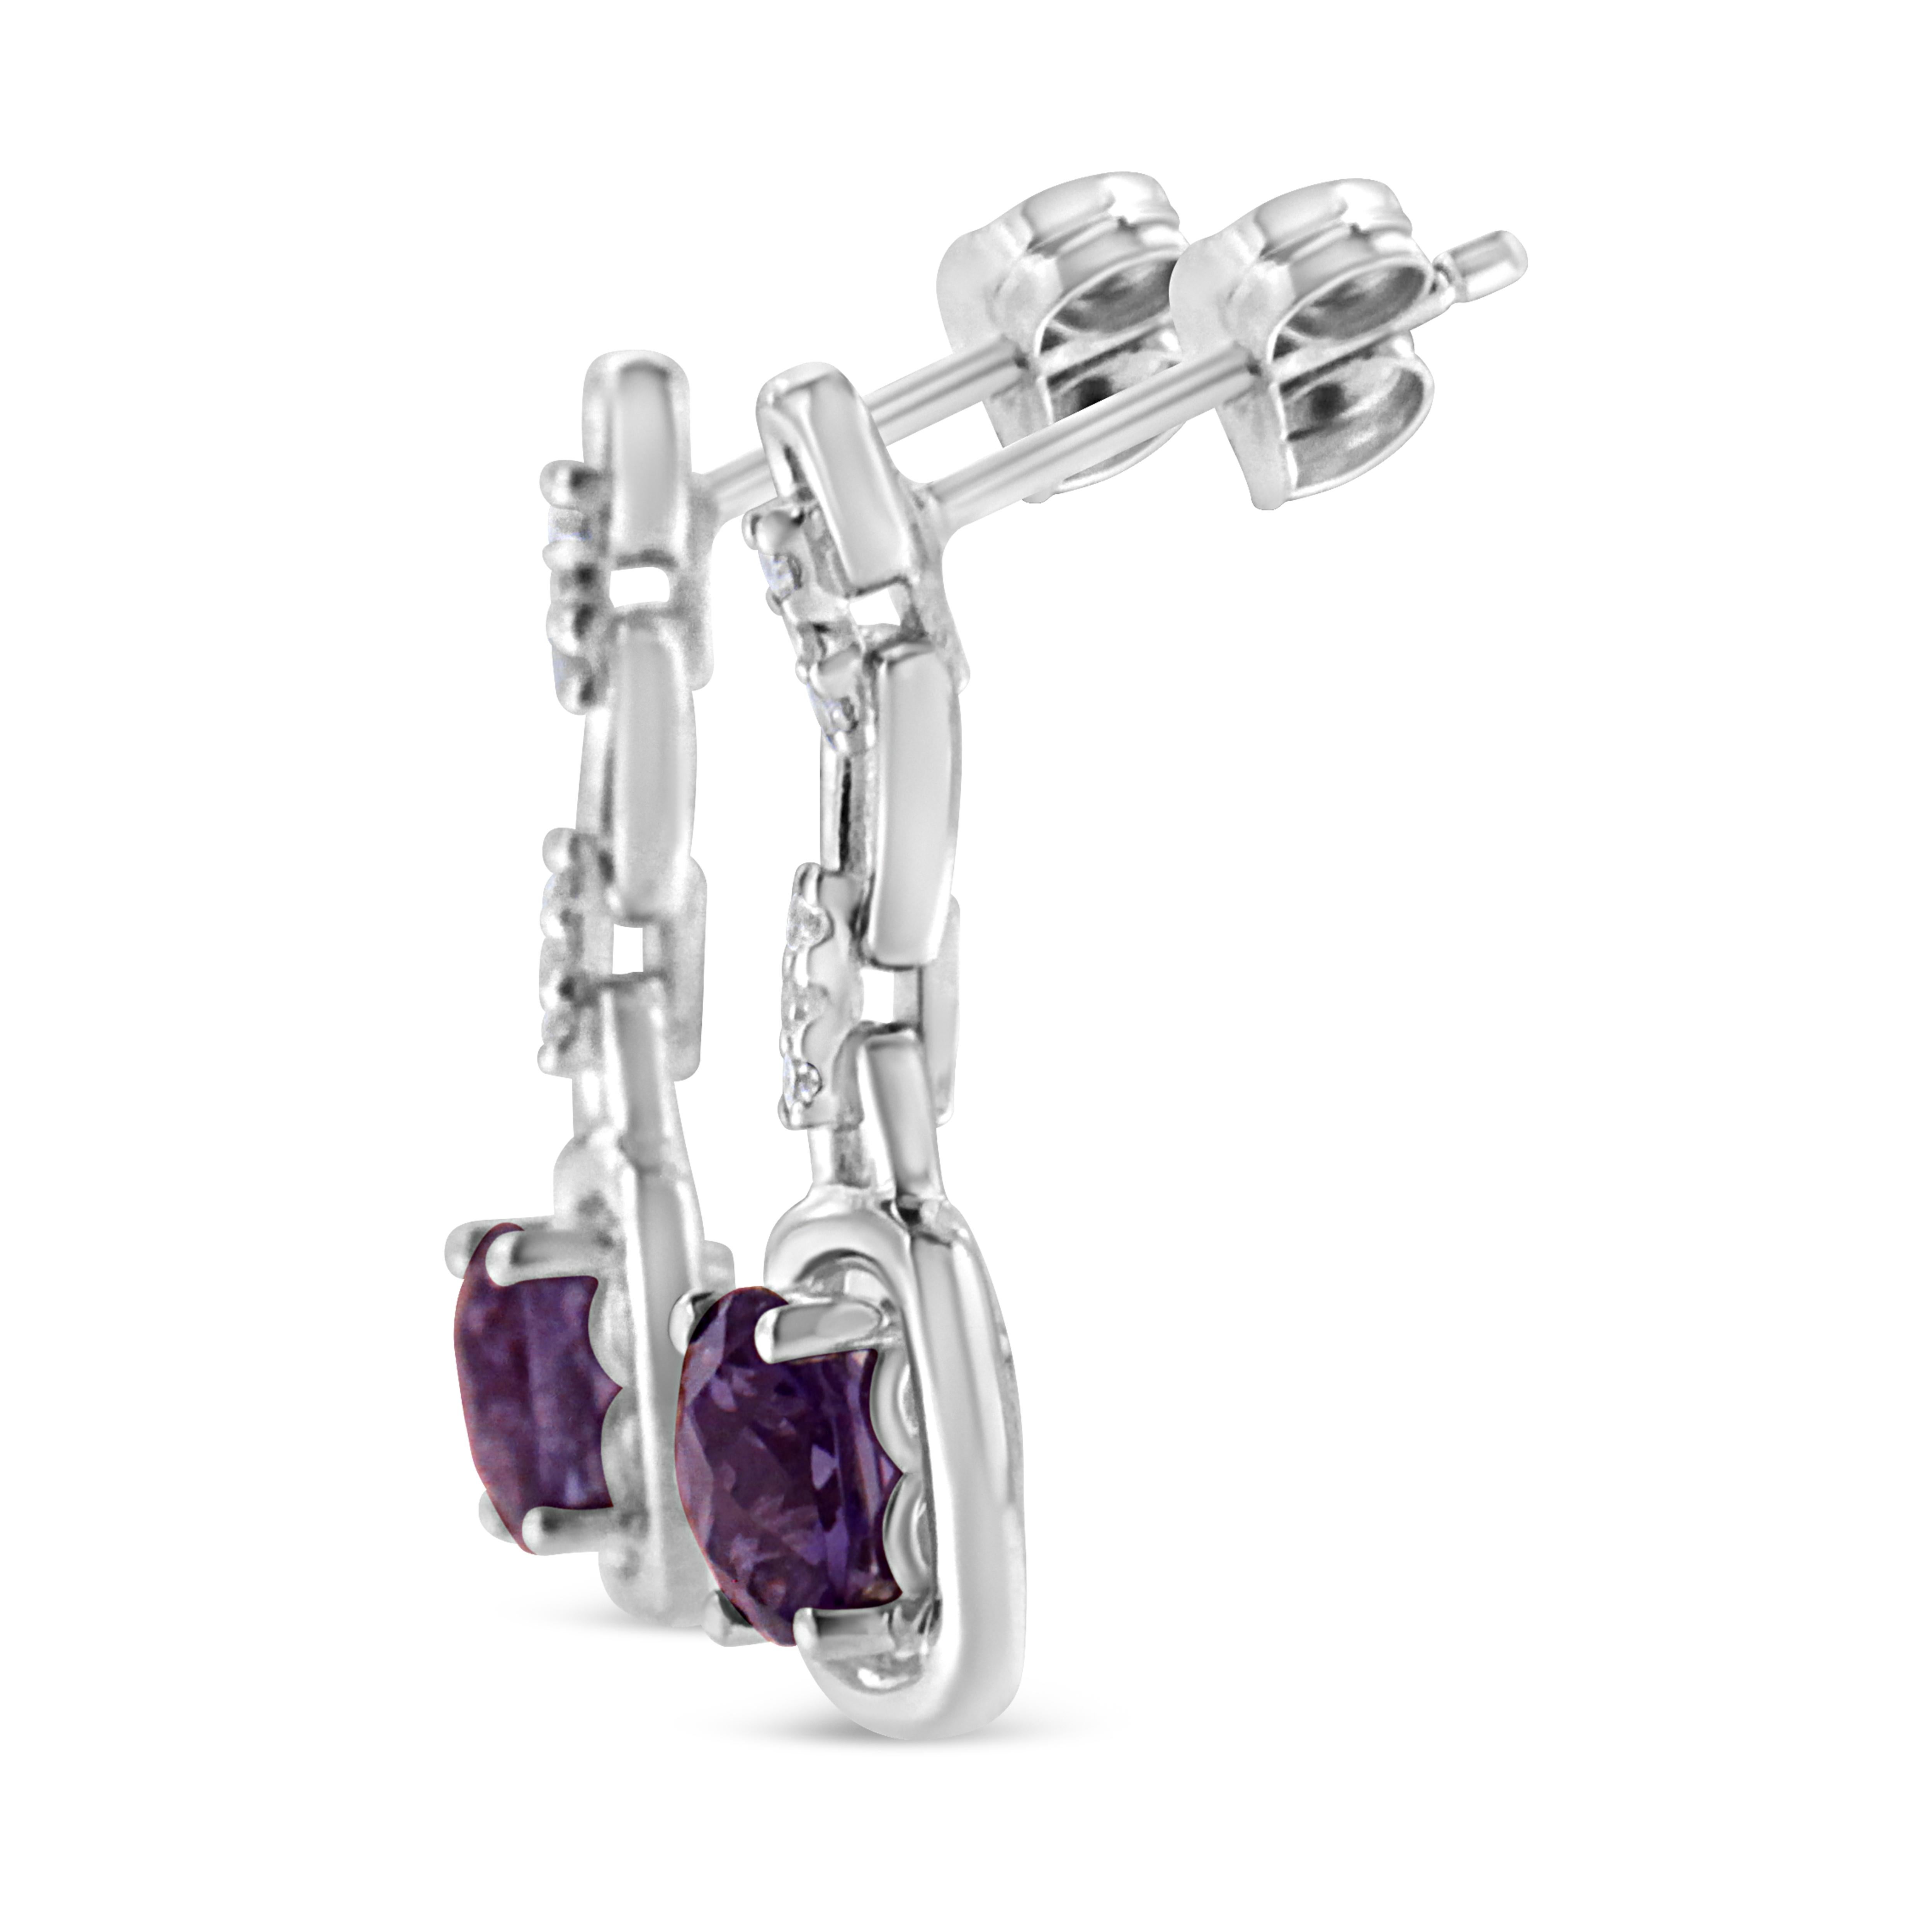 Dazzle with drop and dangle earrings made from the finest .925 sterling silver. The dangle interlocking links are embellished with round-cut, white diamonds. Two stunning 6x6MM cushion shaped natural purple amethyst gemstones dangle from each